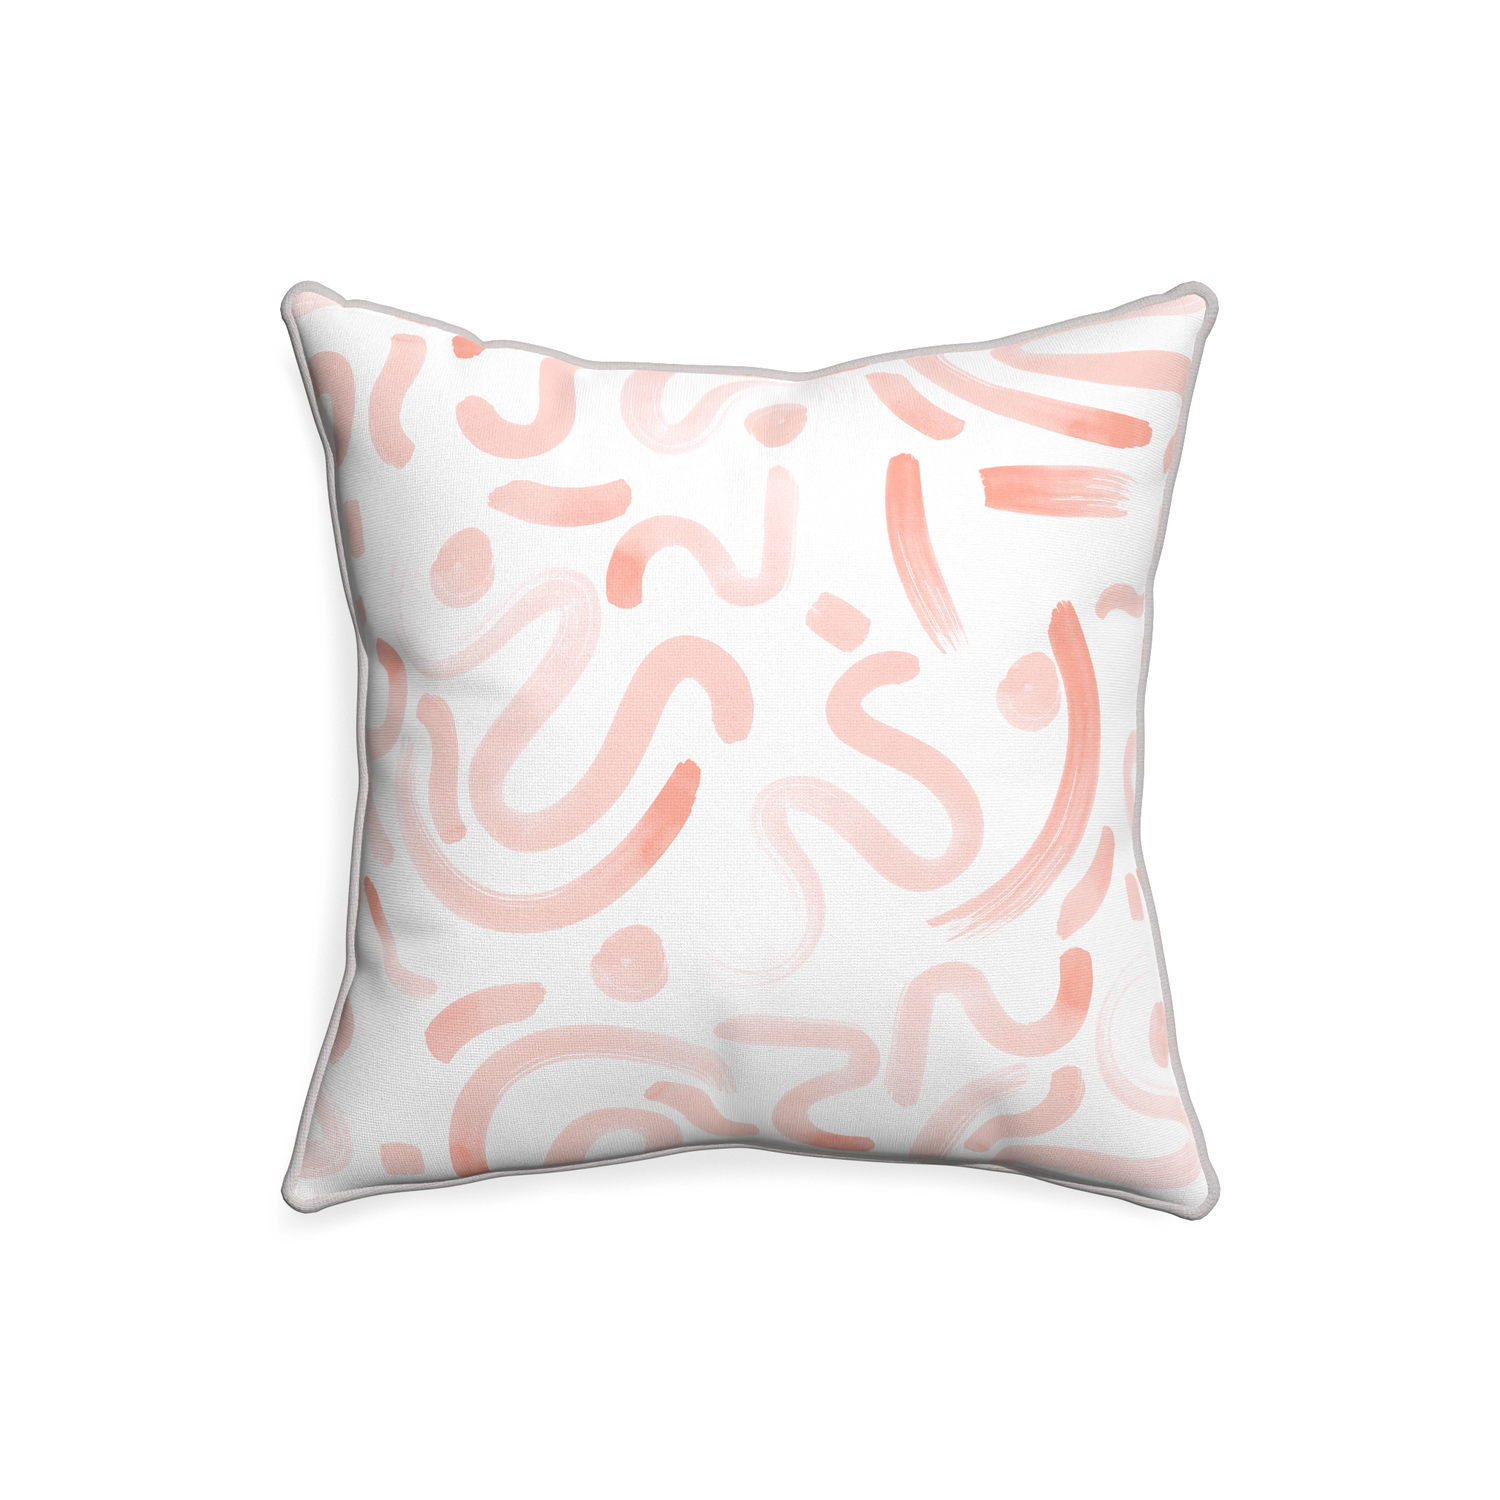 20-square hockney pink custom pink graphicpillow with pebble piping on white background